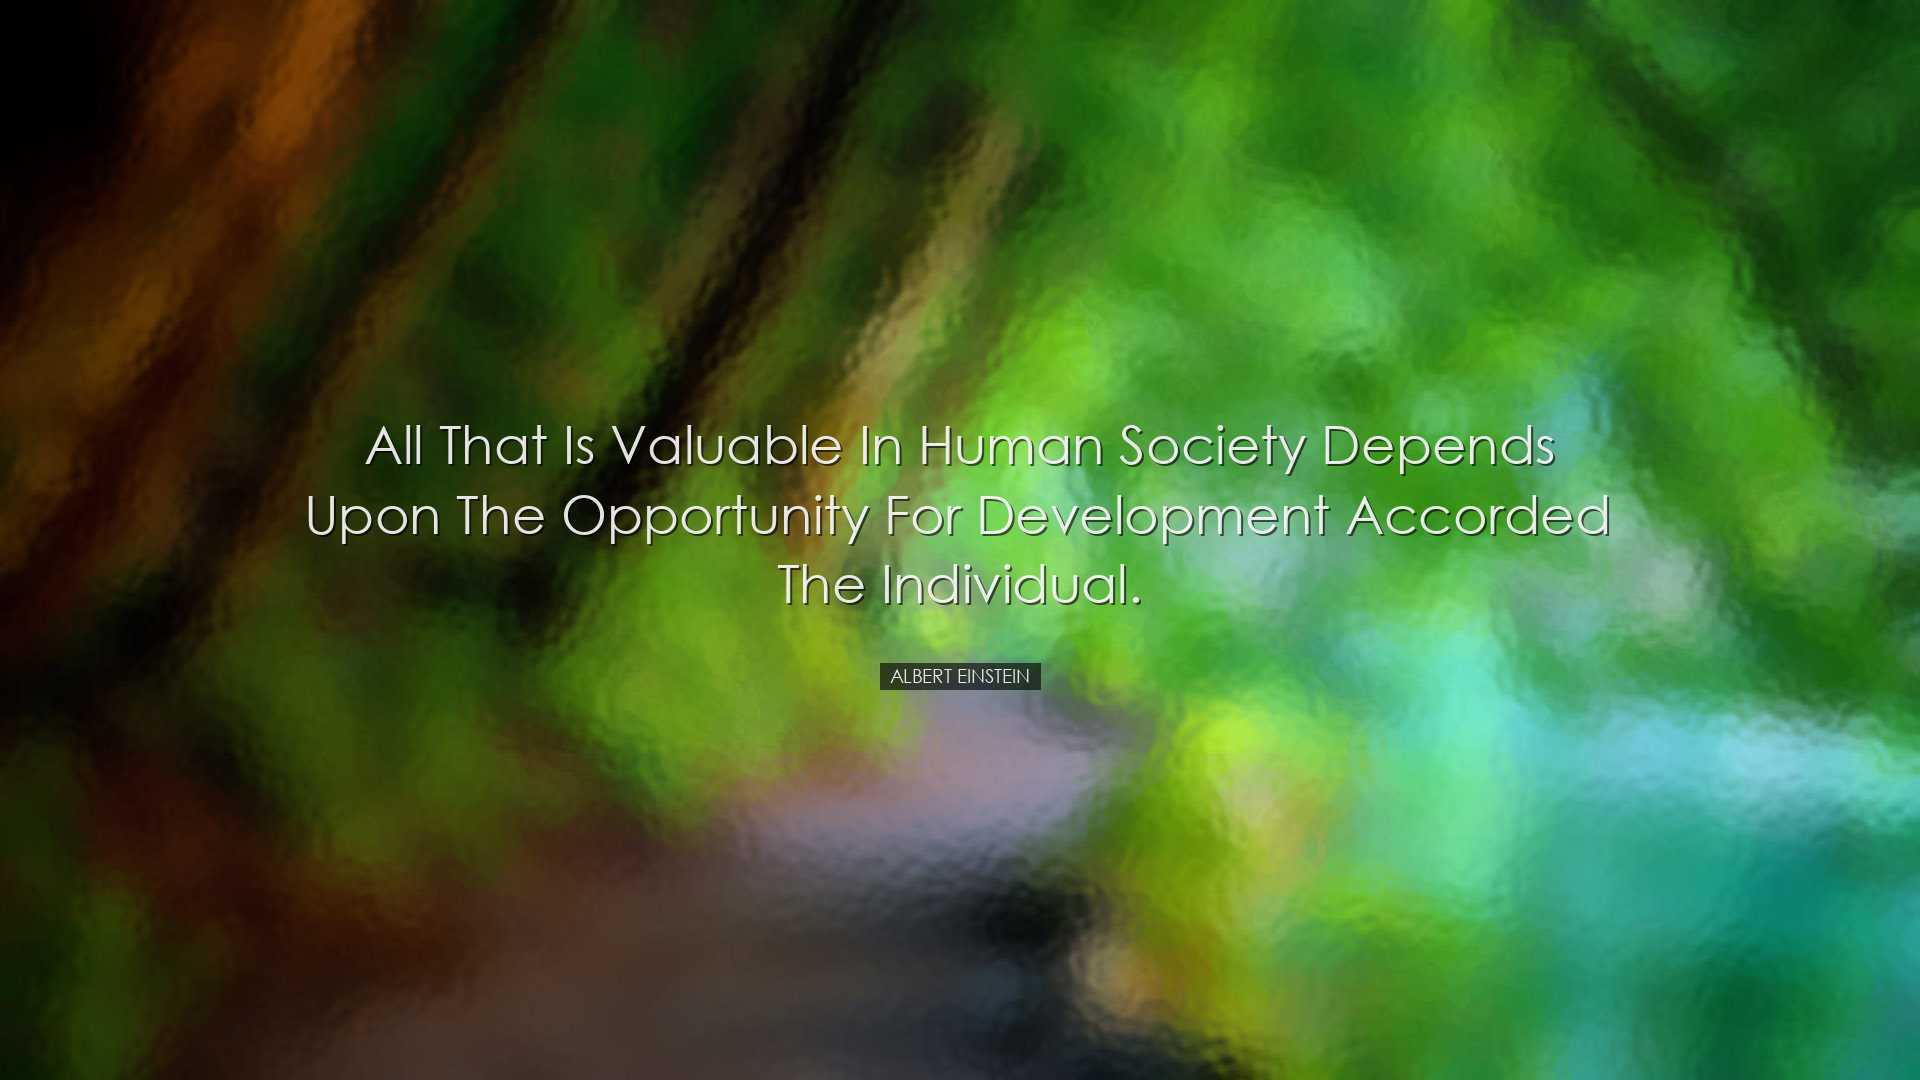 All that is valuable in human society depends upon the opportunity